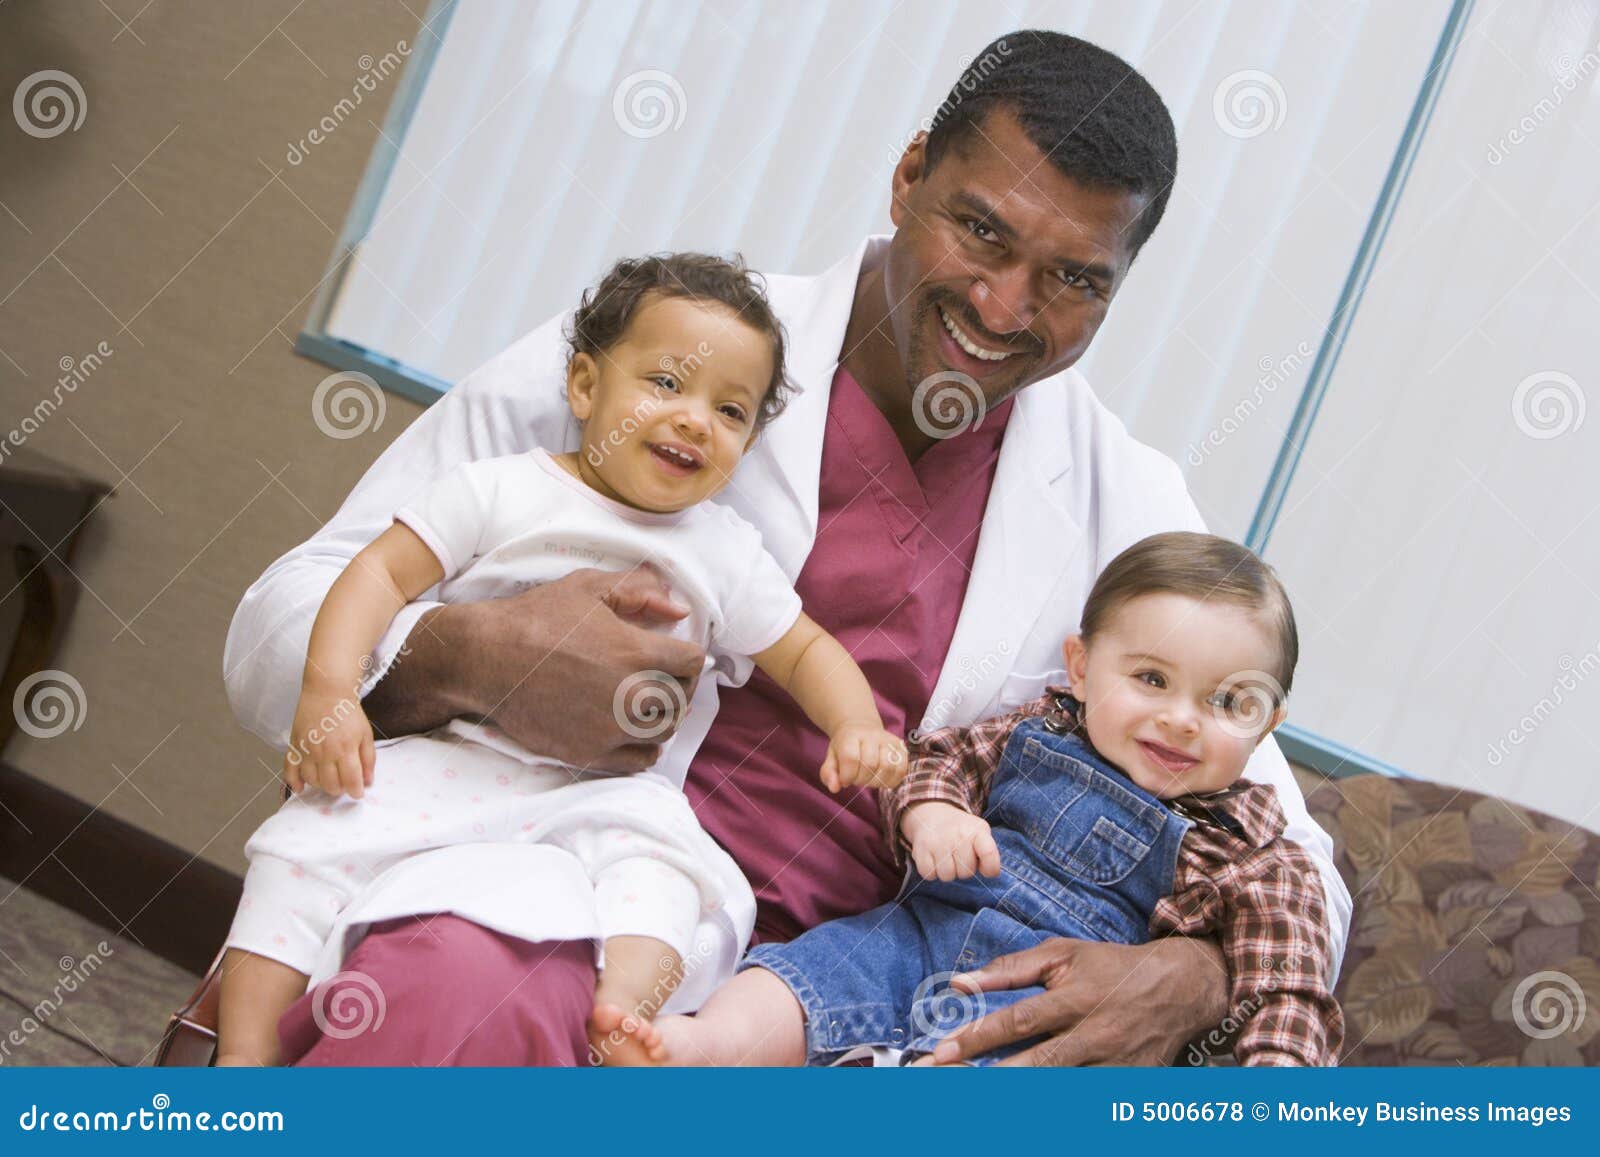 consultant holding two ivf children